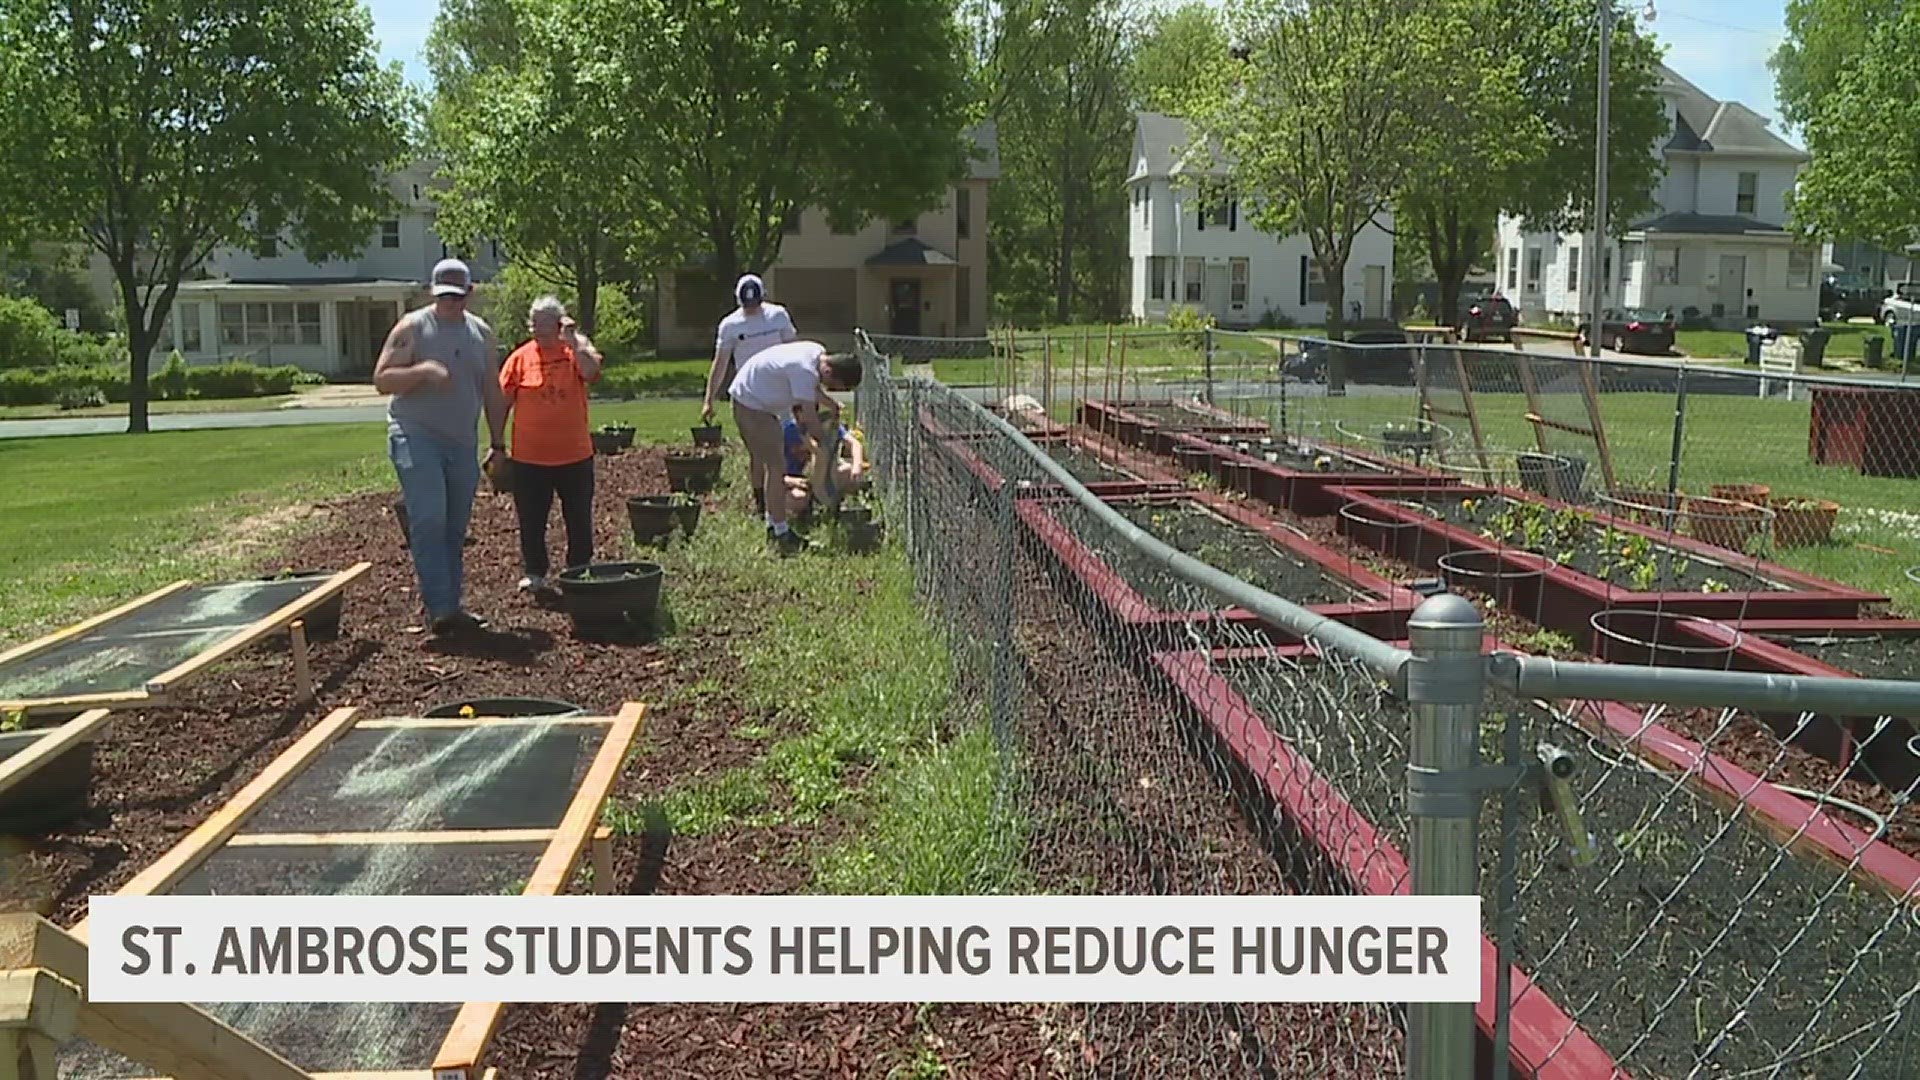 Students are partnering with People Uniting Neighbors and Churches, or P.U.N.C.H., to grow fruits and vegetables in Davenport community garden.